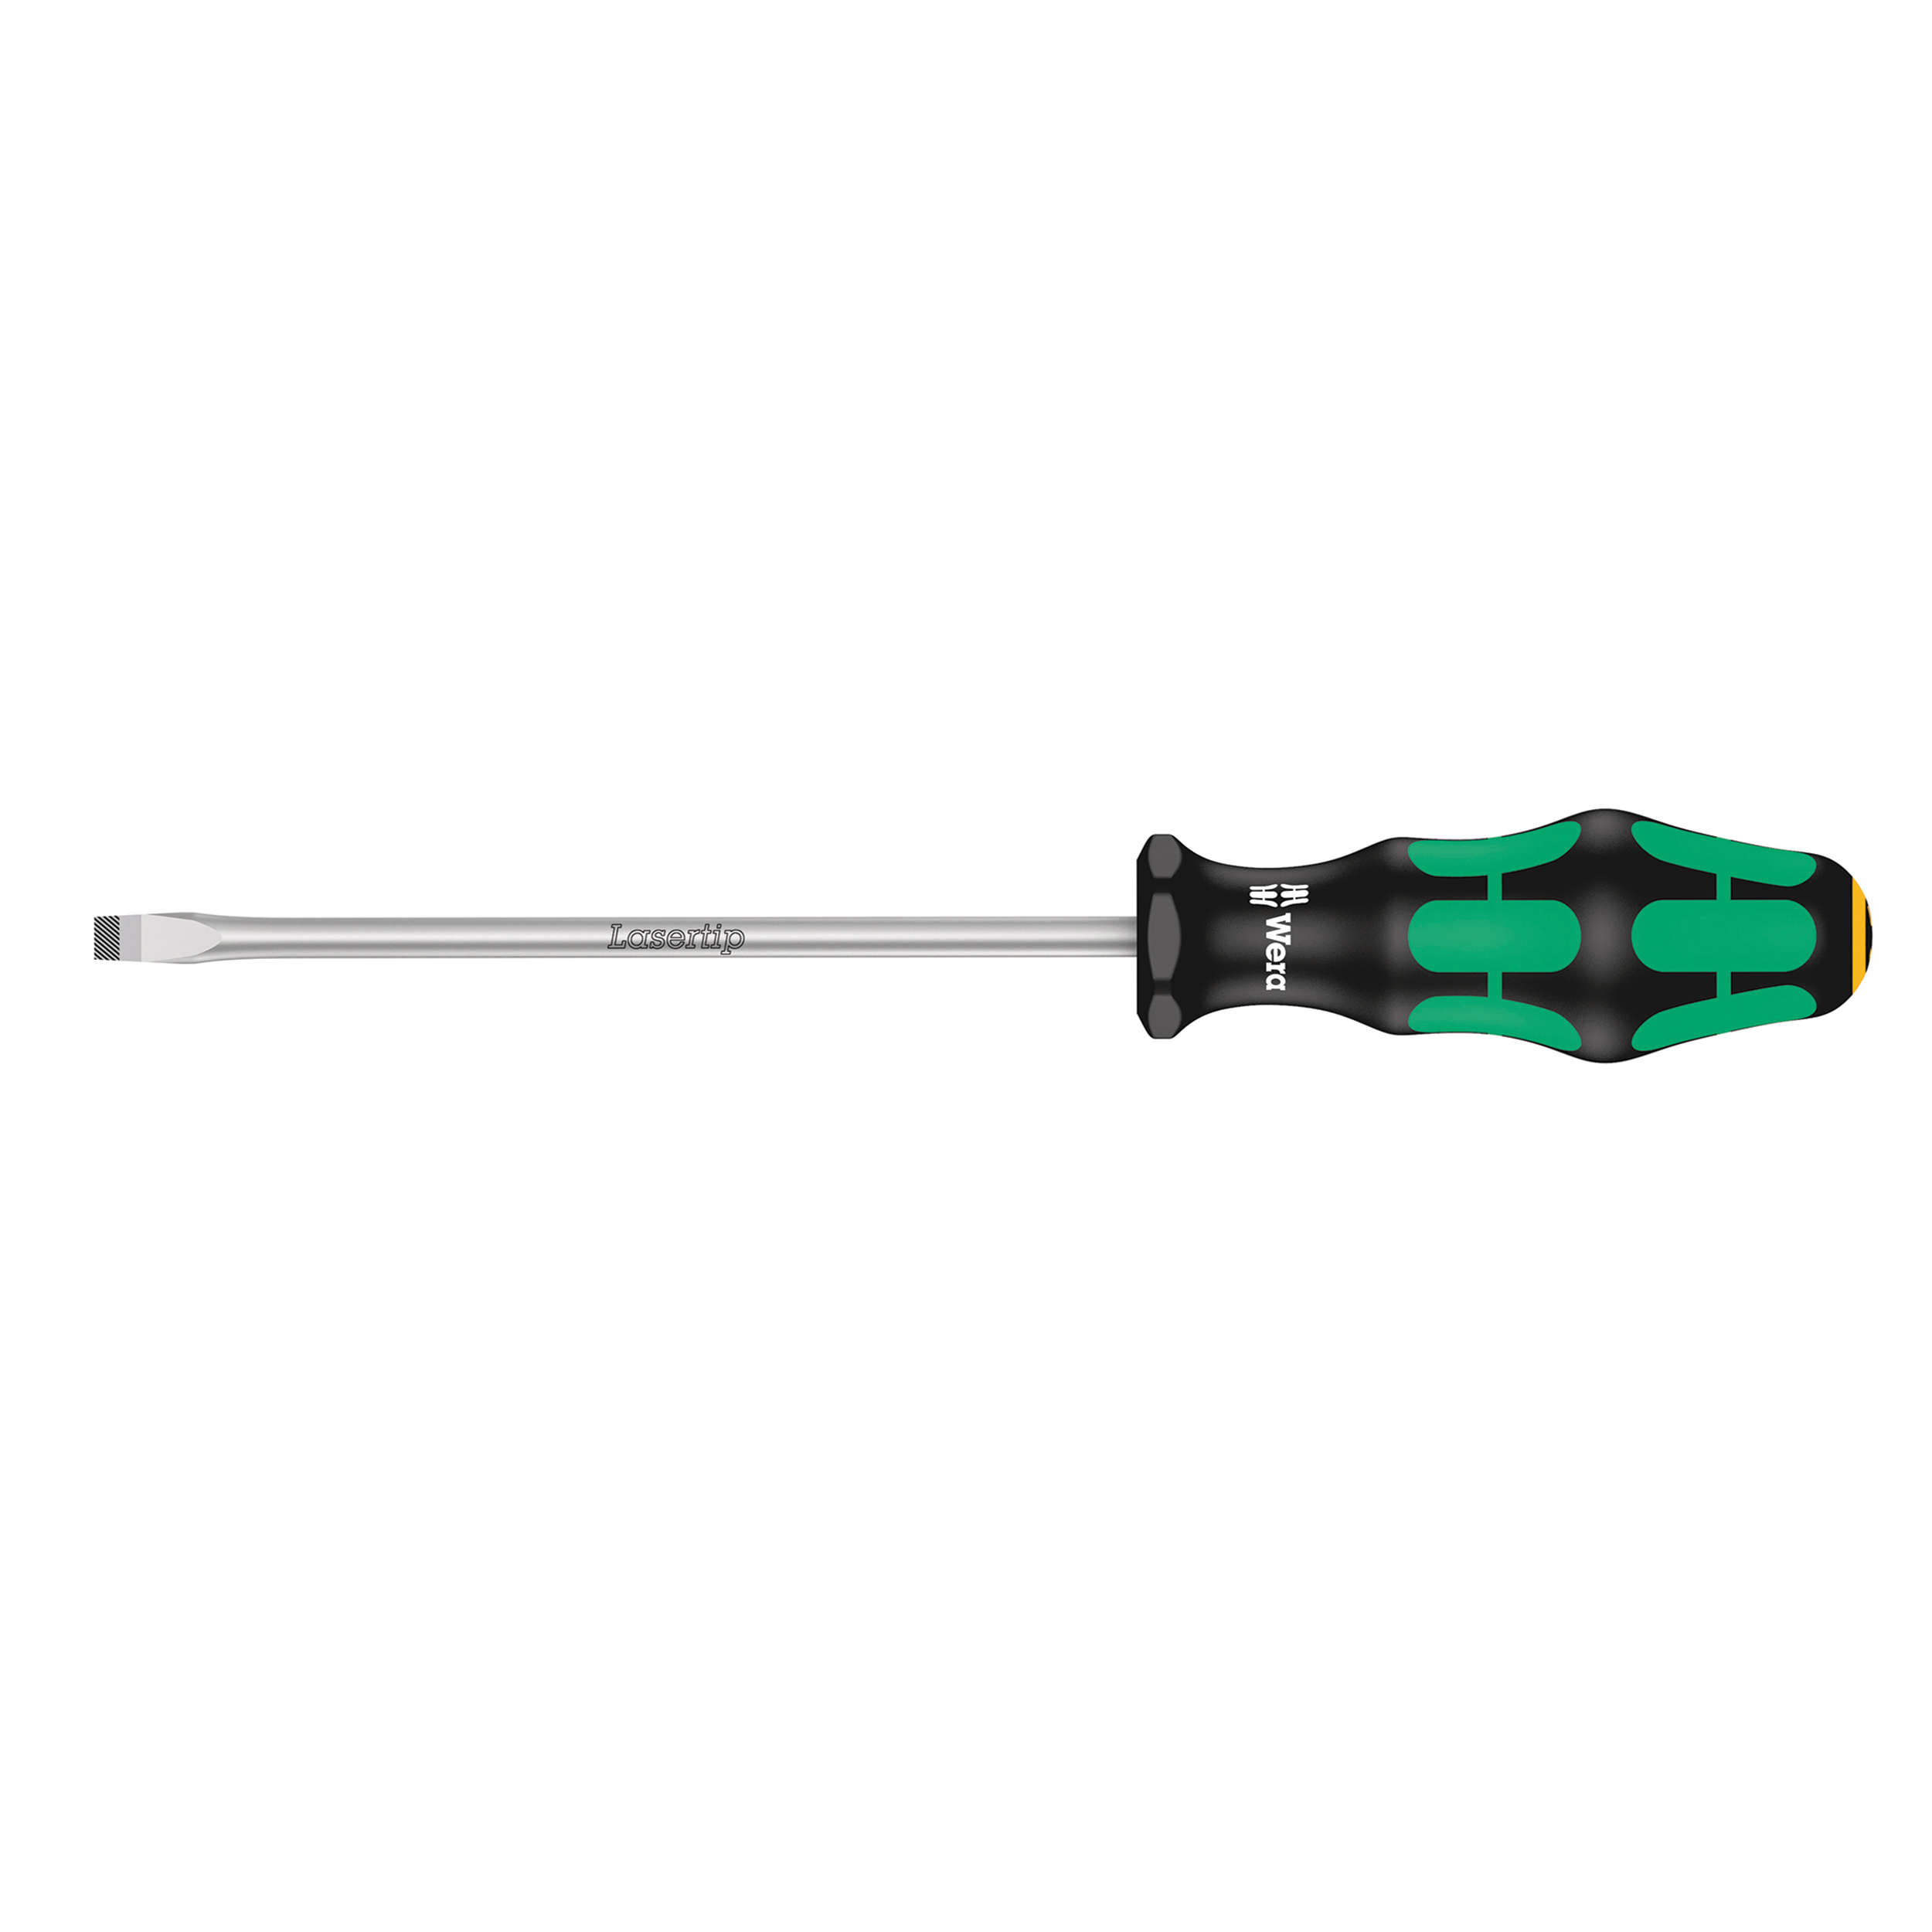 Slotted 6.5x150mm 334 Screwdriver